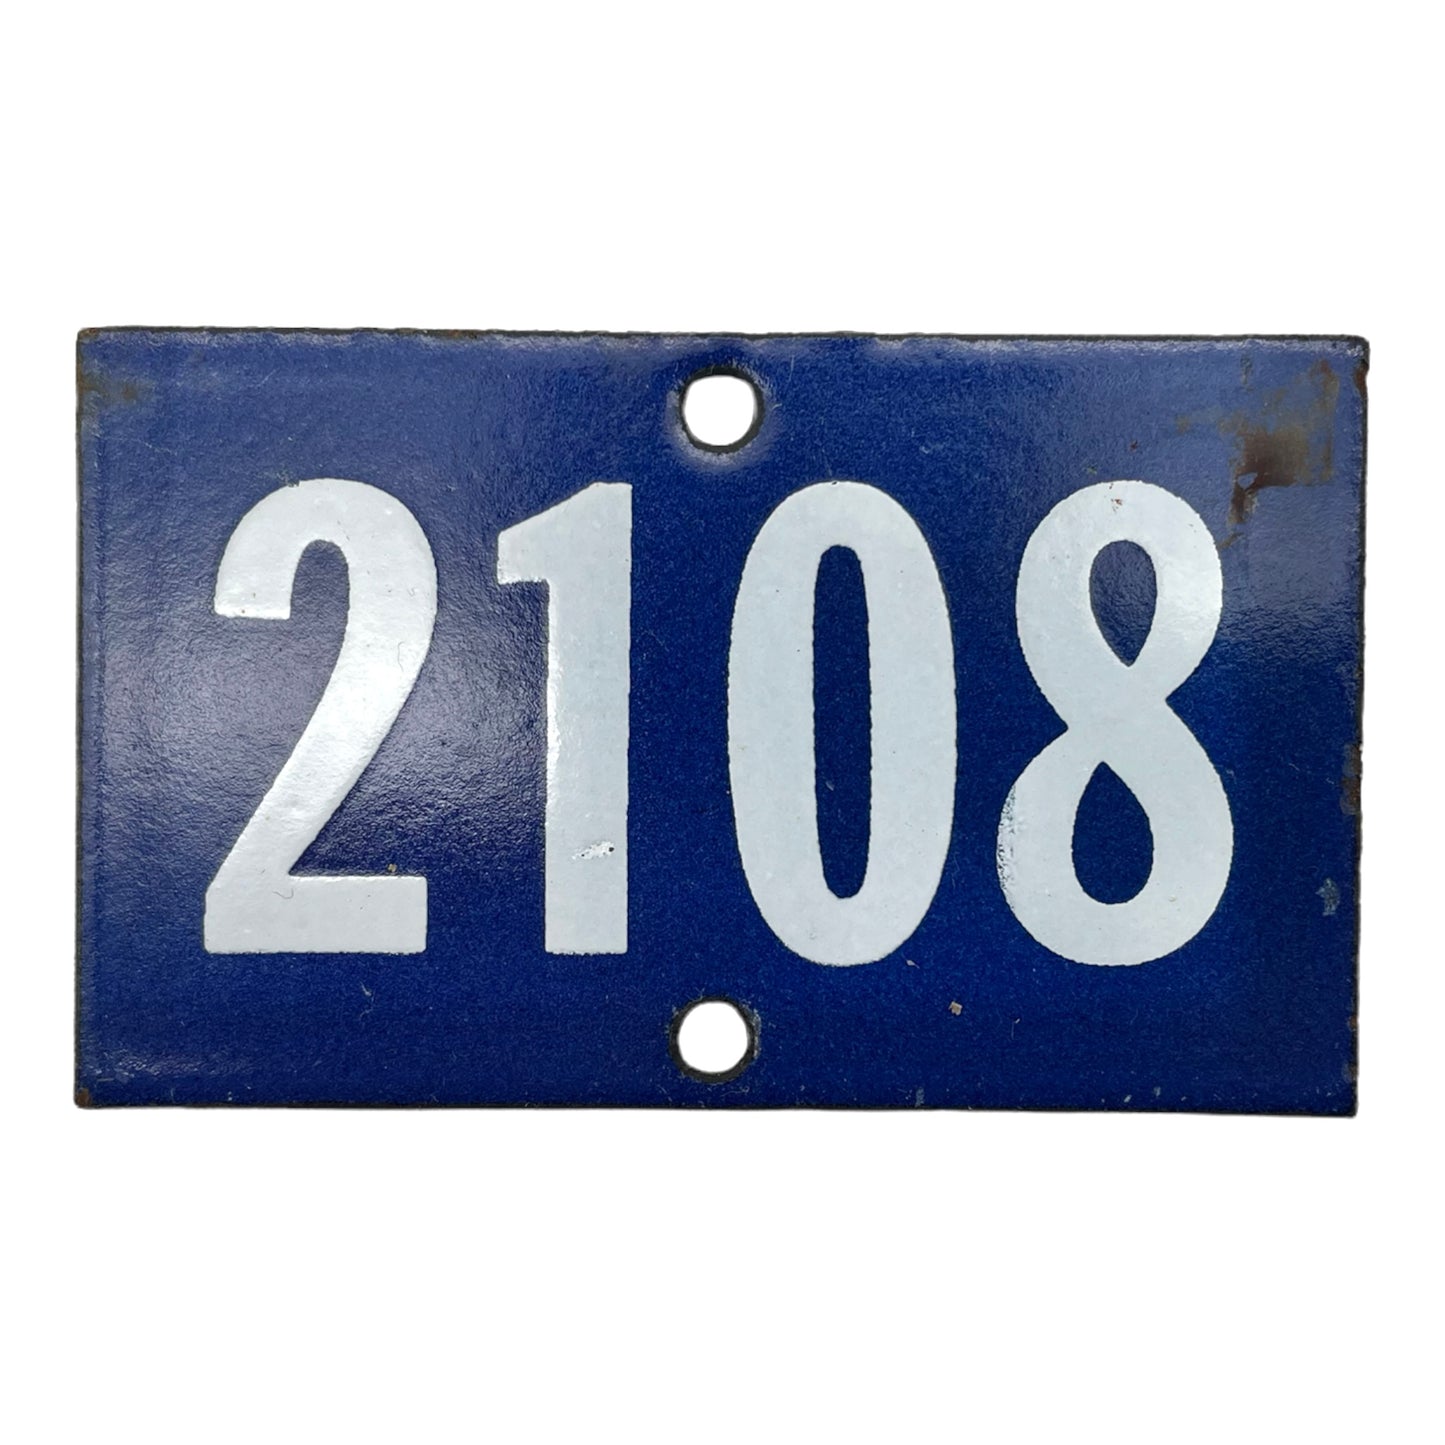 image of vintage French enamel door or house number 2108 sold by allthingsfrenchstore.com